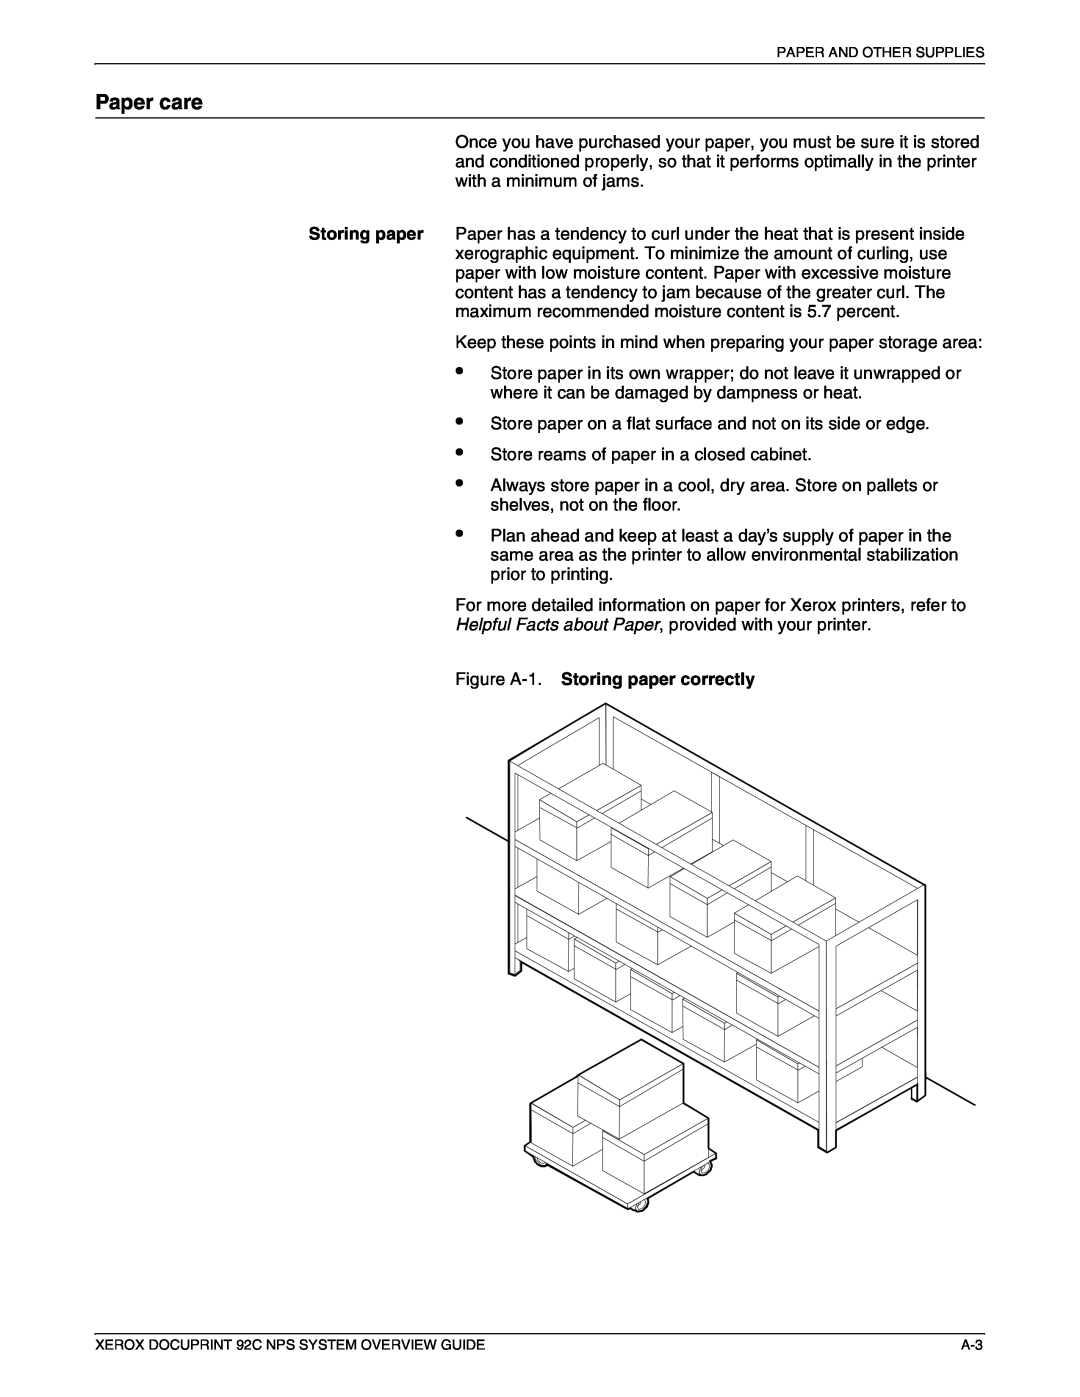 Xerox 92C NPS manual Paper care, Figure A-1. Storing paper correctly 